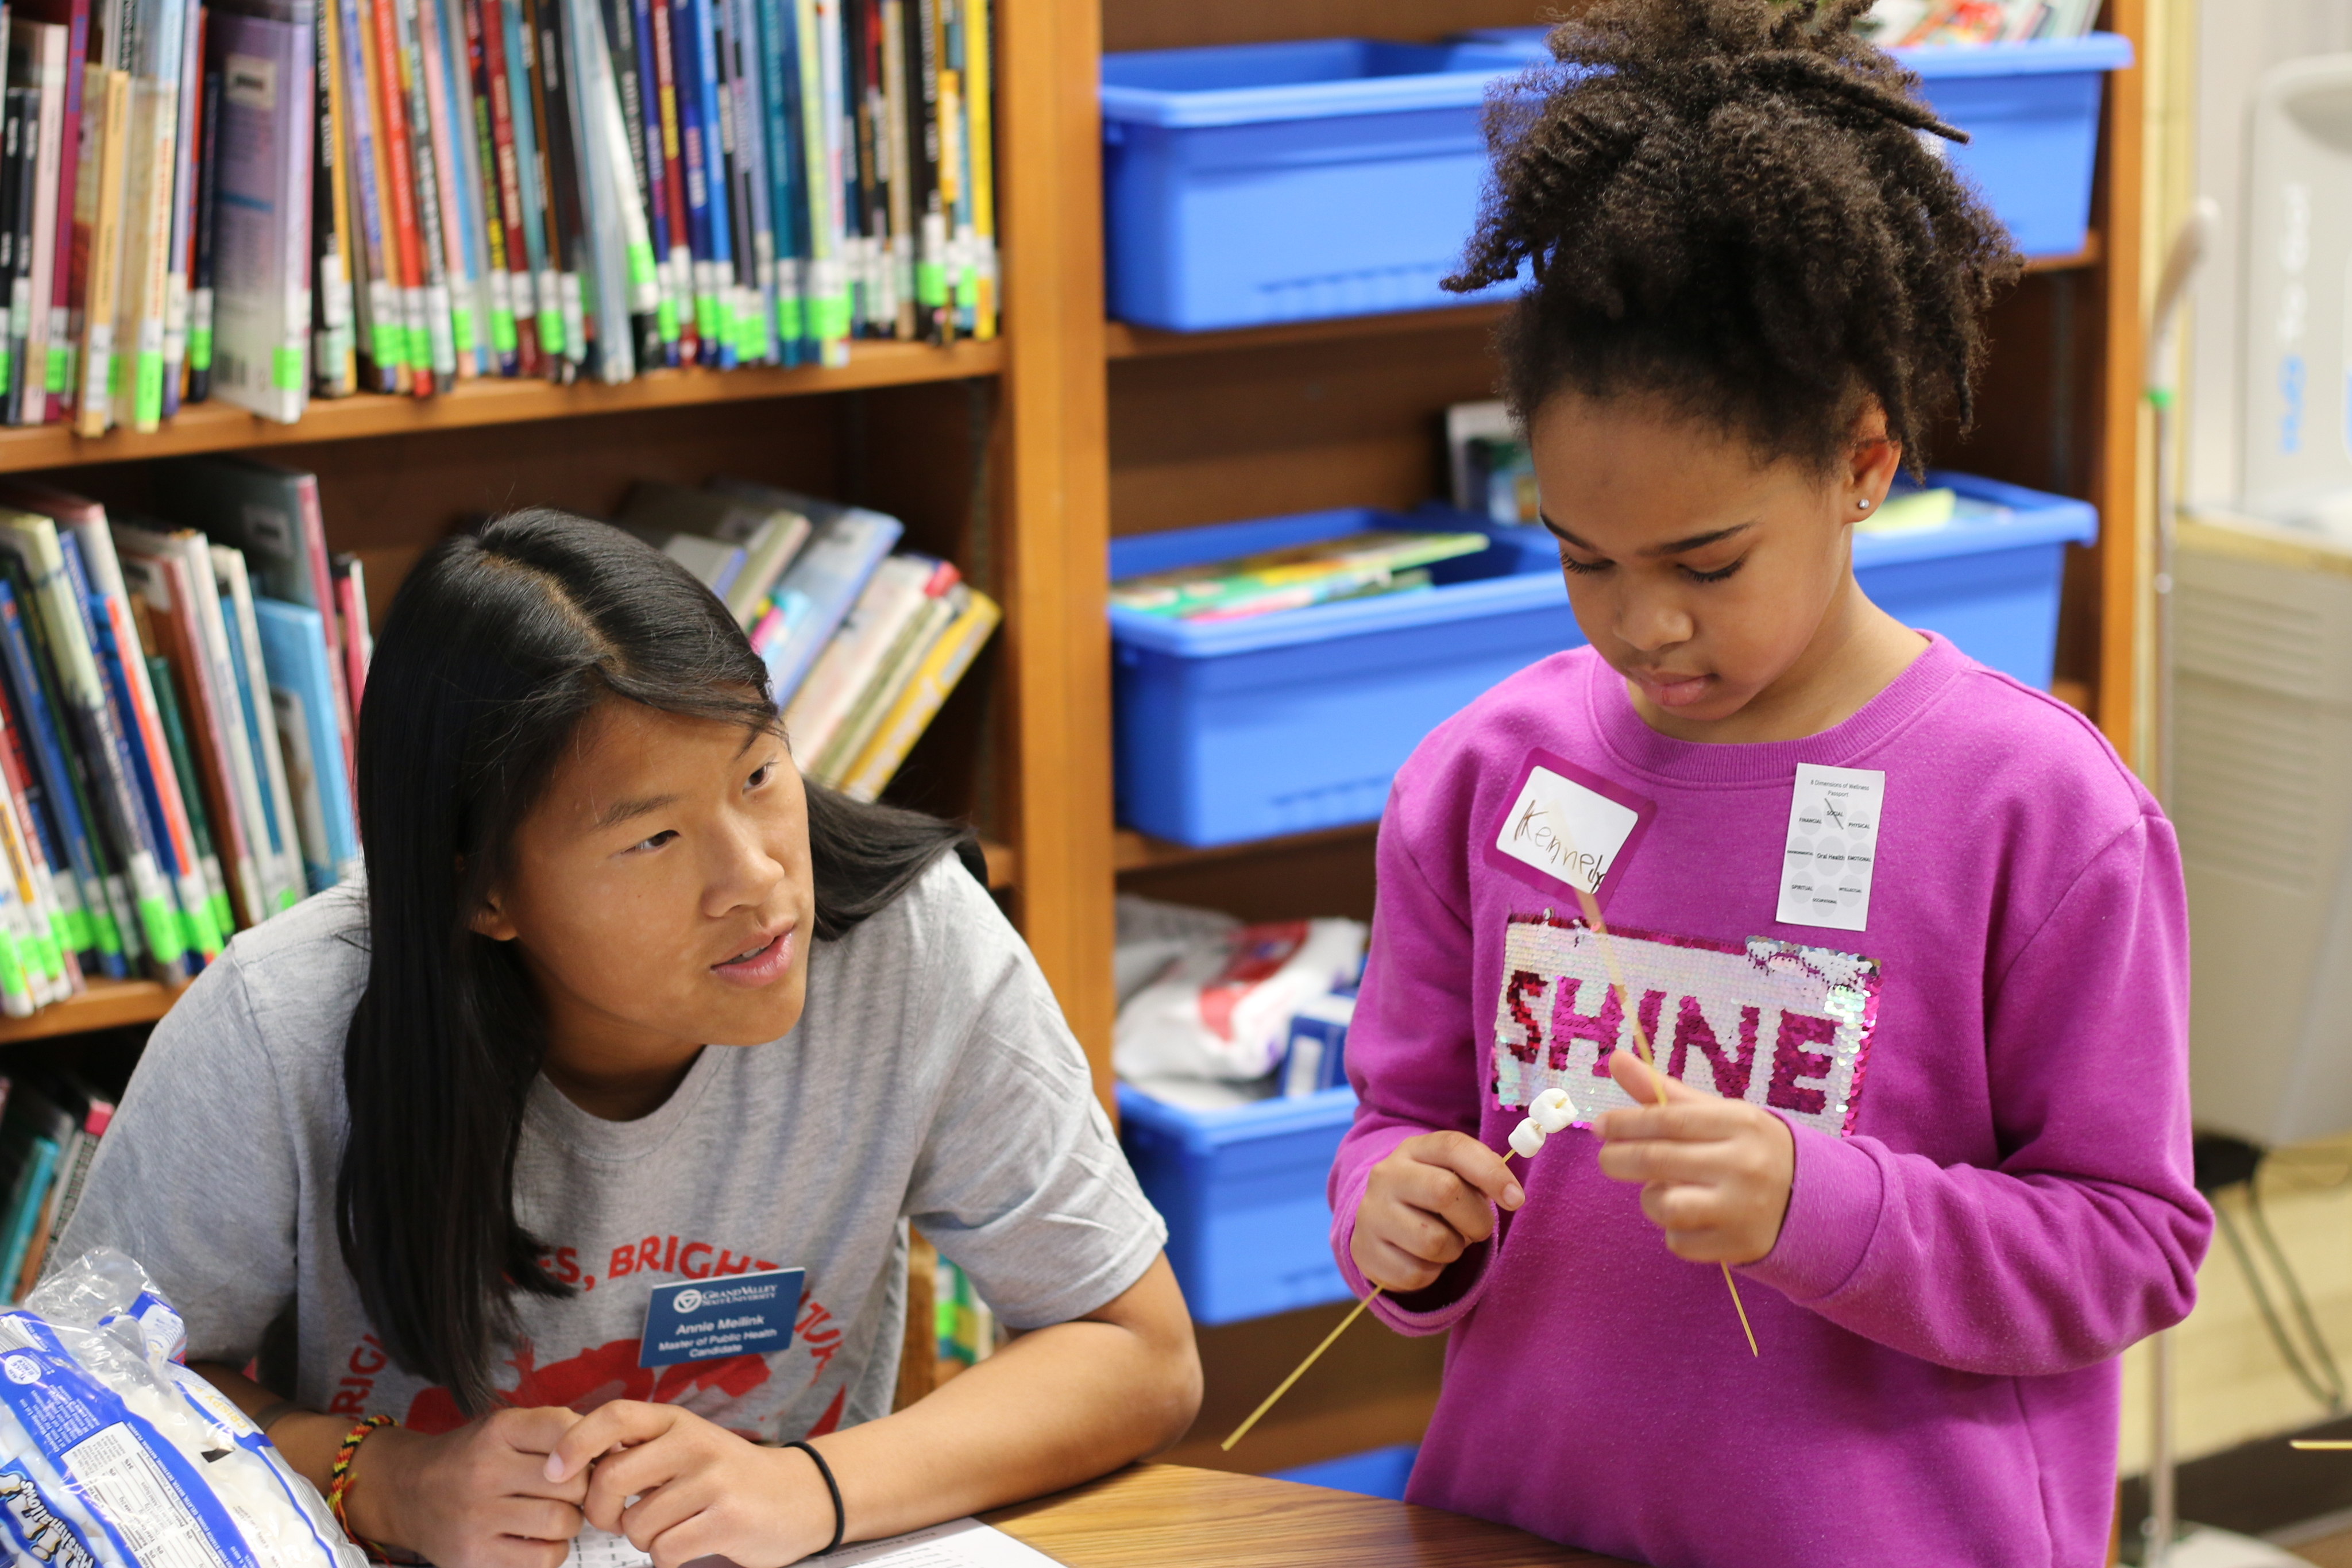 A GVSU public health student master’s student works with a scholar at Mulick Park Elementary